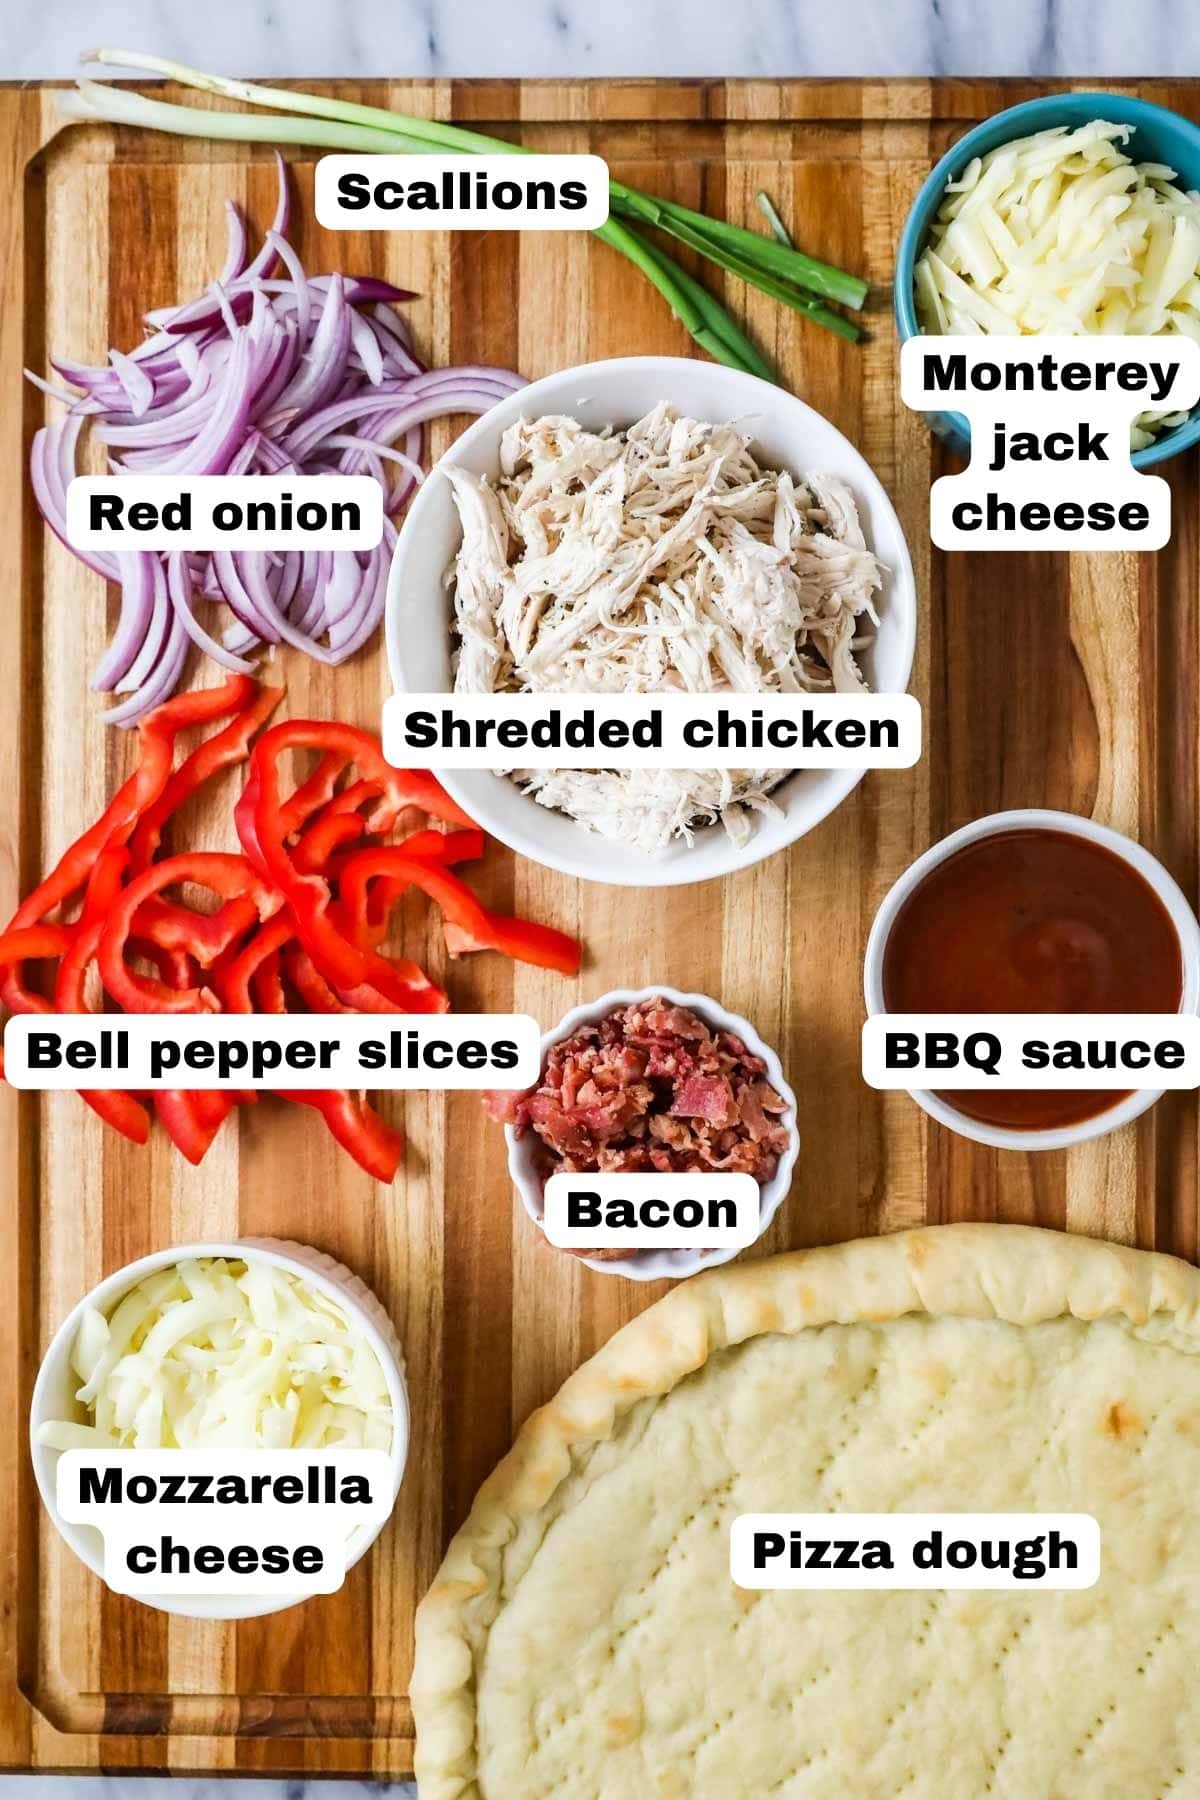 Overhead view of labelled ingredients including shredded chicken, pizza dough, bbq sauce, cheese, and more.